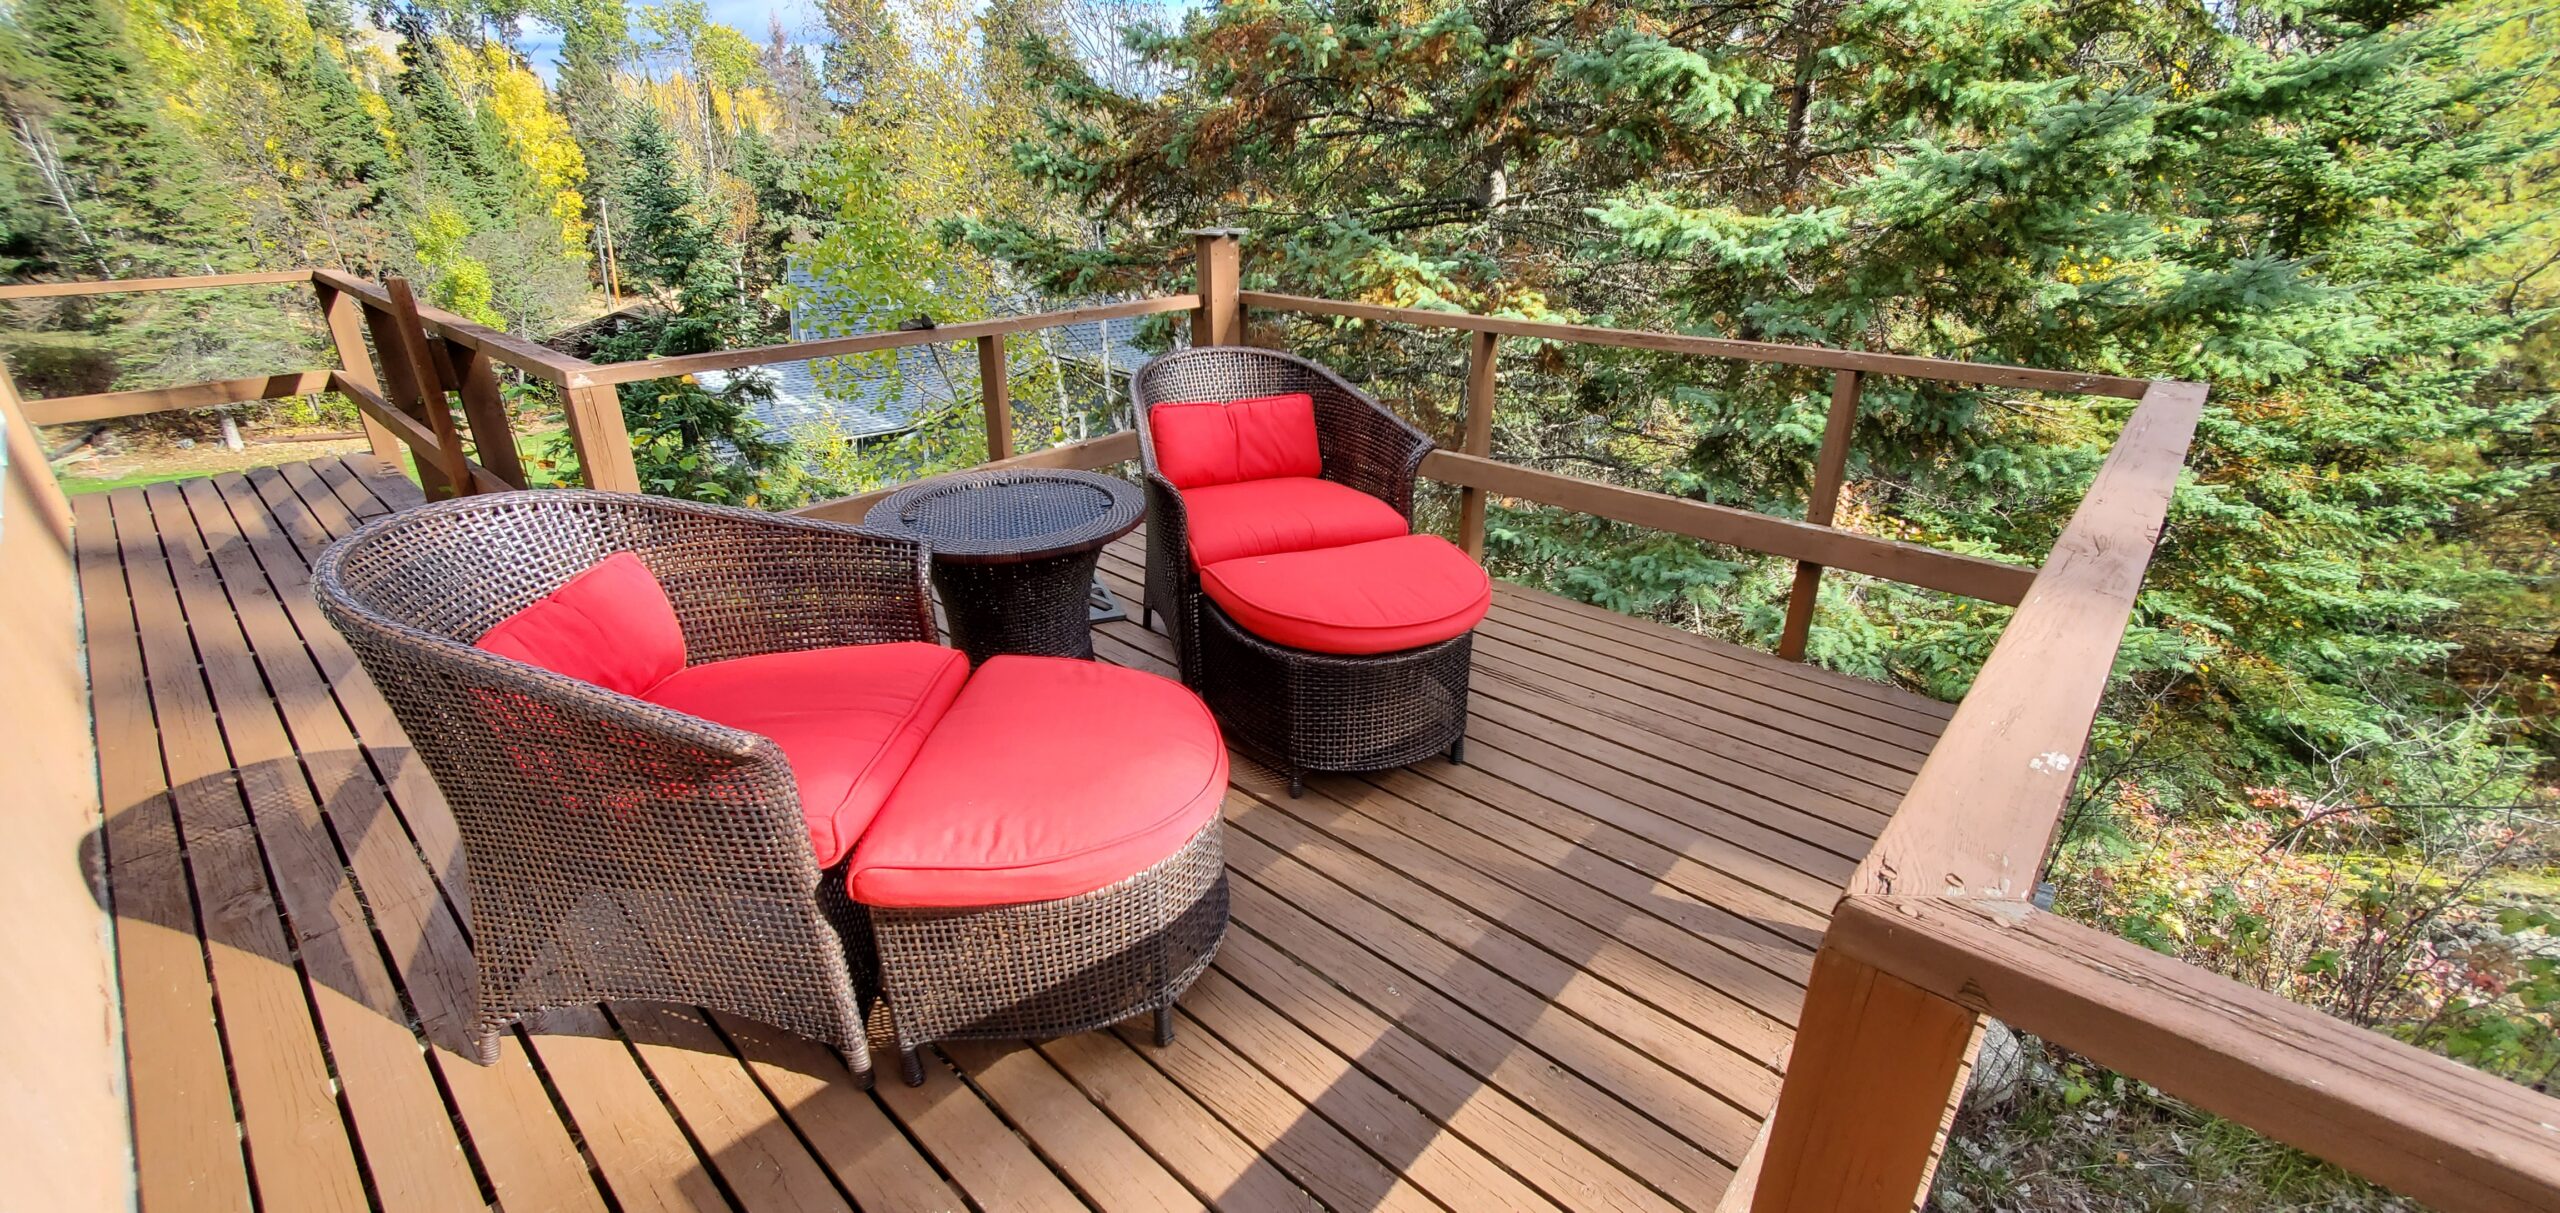 A big deck with two cushioned patio chairs, looking out over trees.